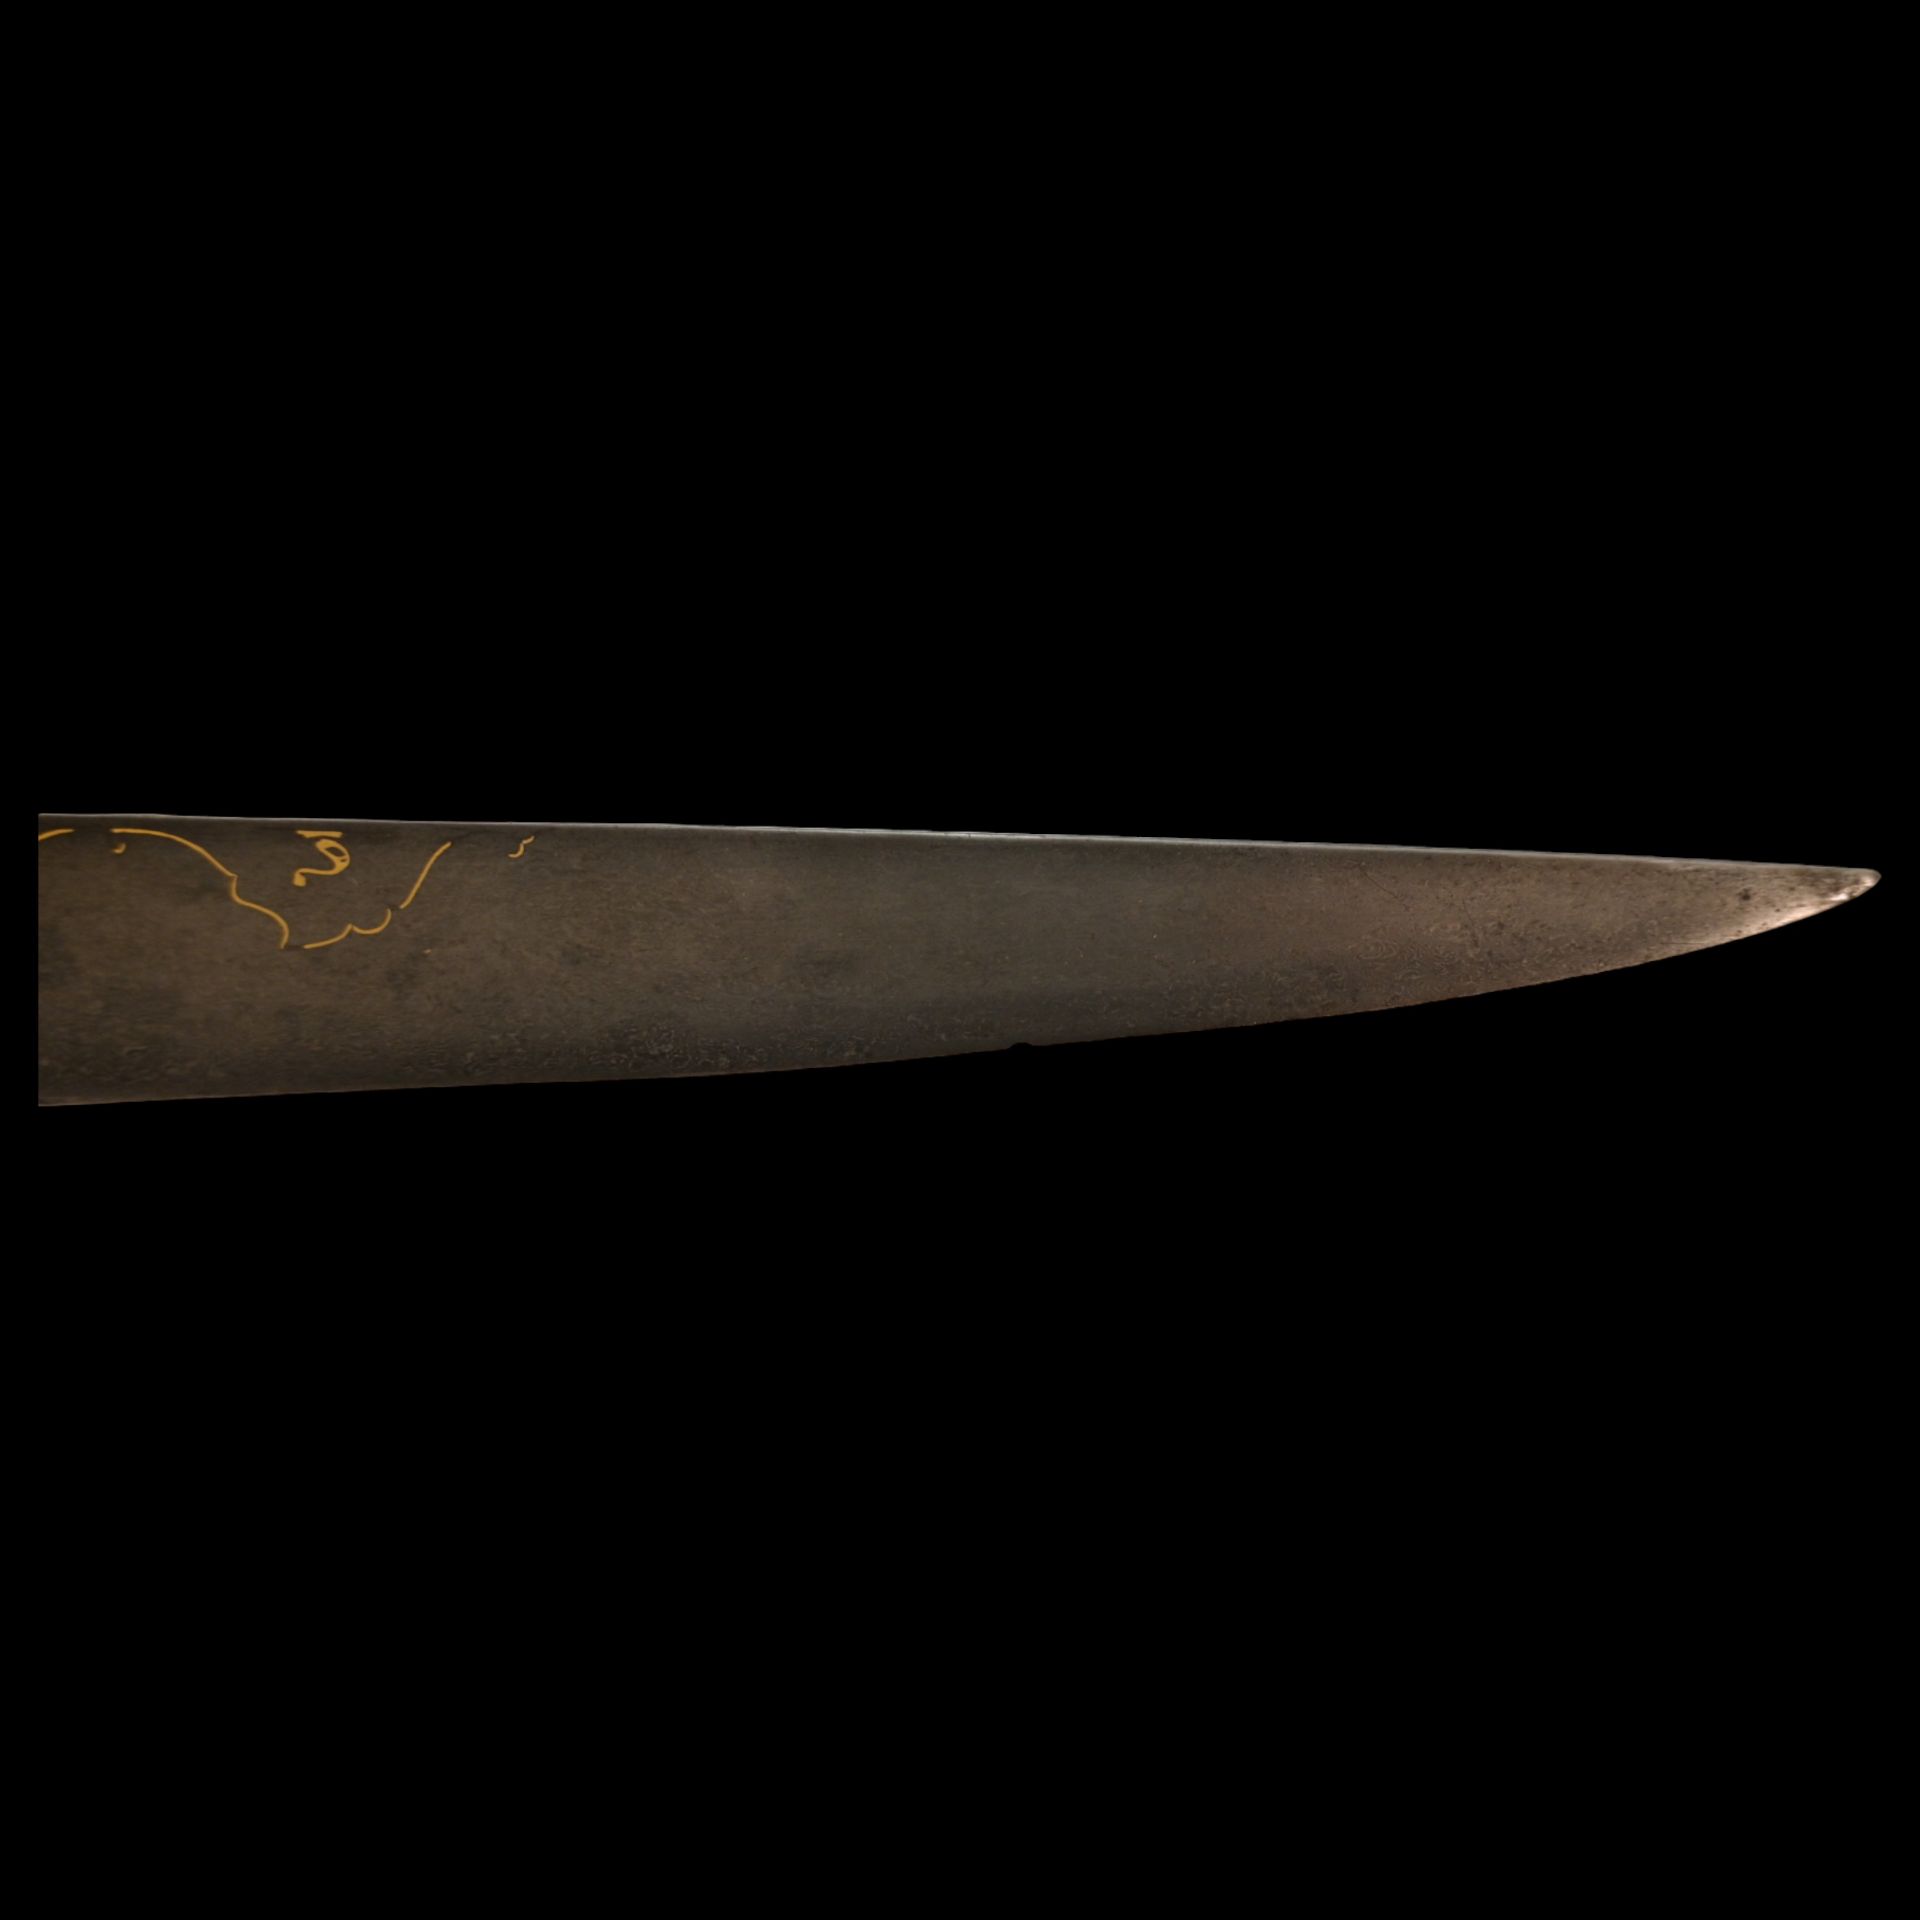 A PERSIAN ZAND DYNASTY KARD DAGGER WITH WOOTZ BLADE AND GOLD INLAY. - Image 26 of 27